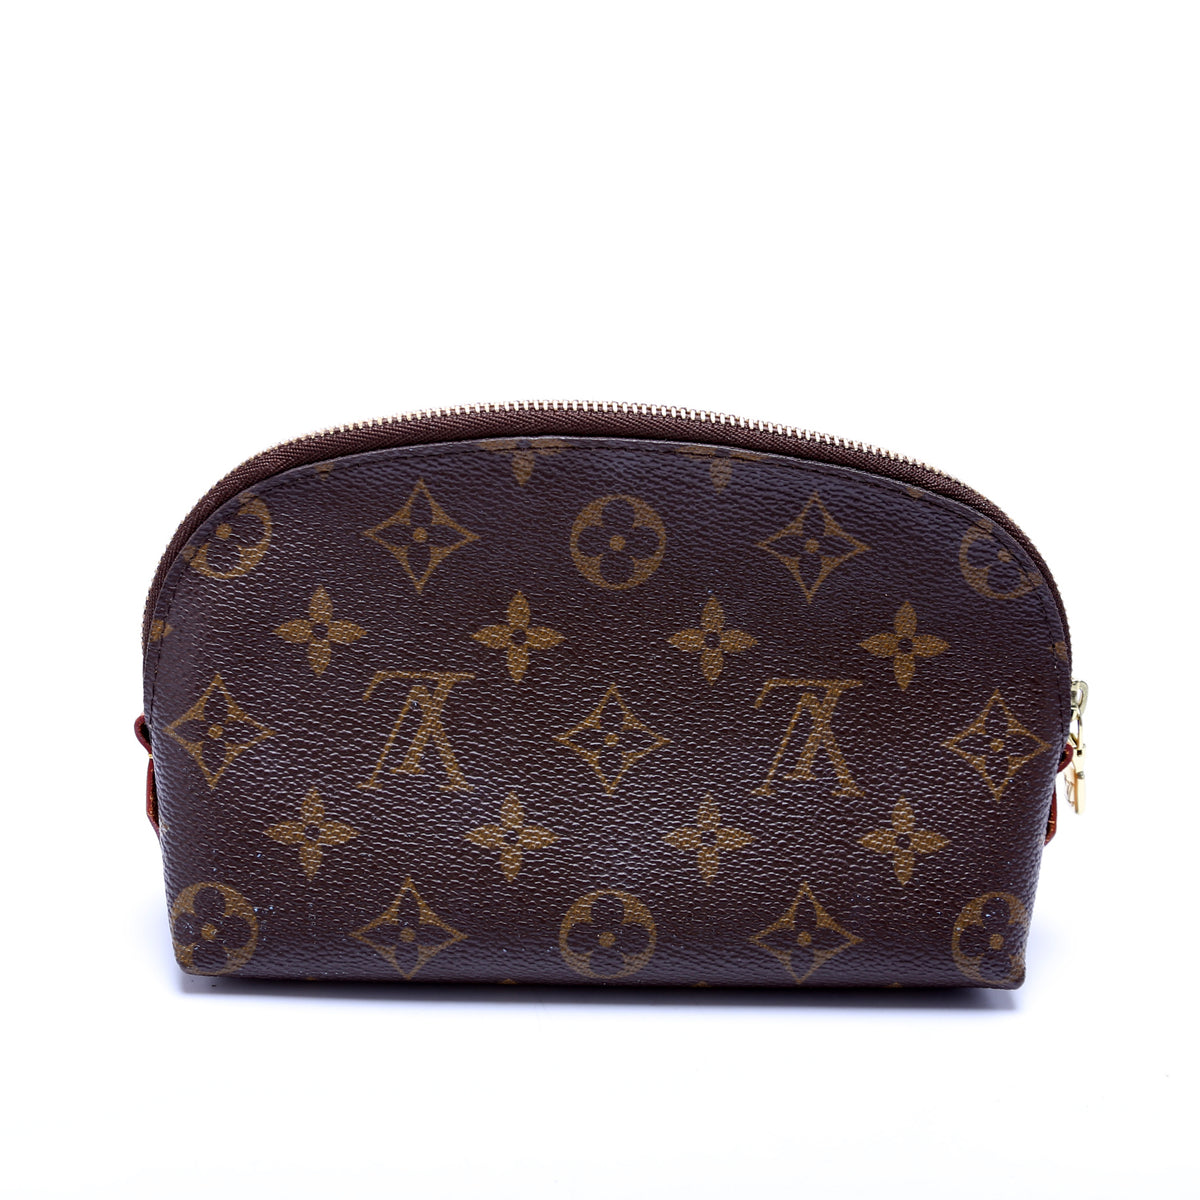 Louis Vuitton, Monogram, A Hard Coated Fabric Vanity Case Or